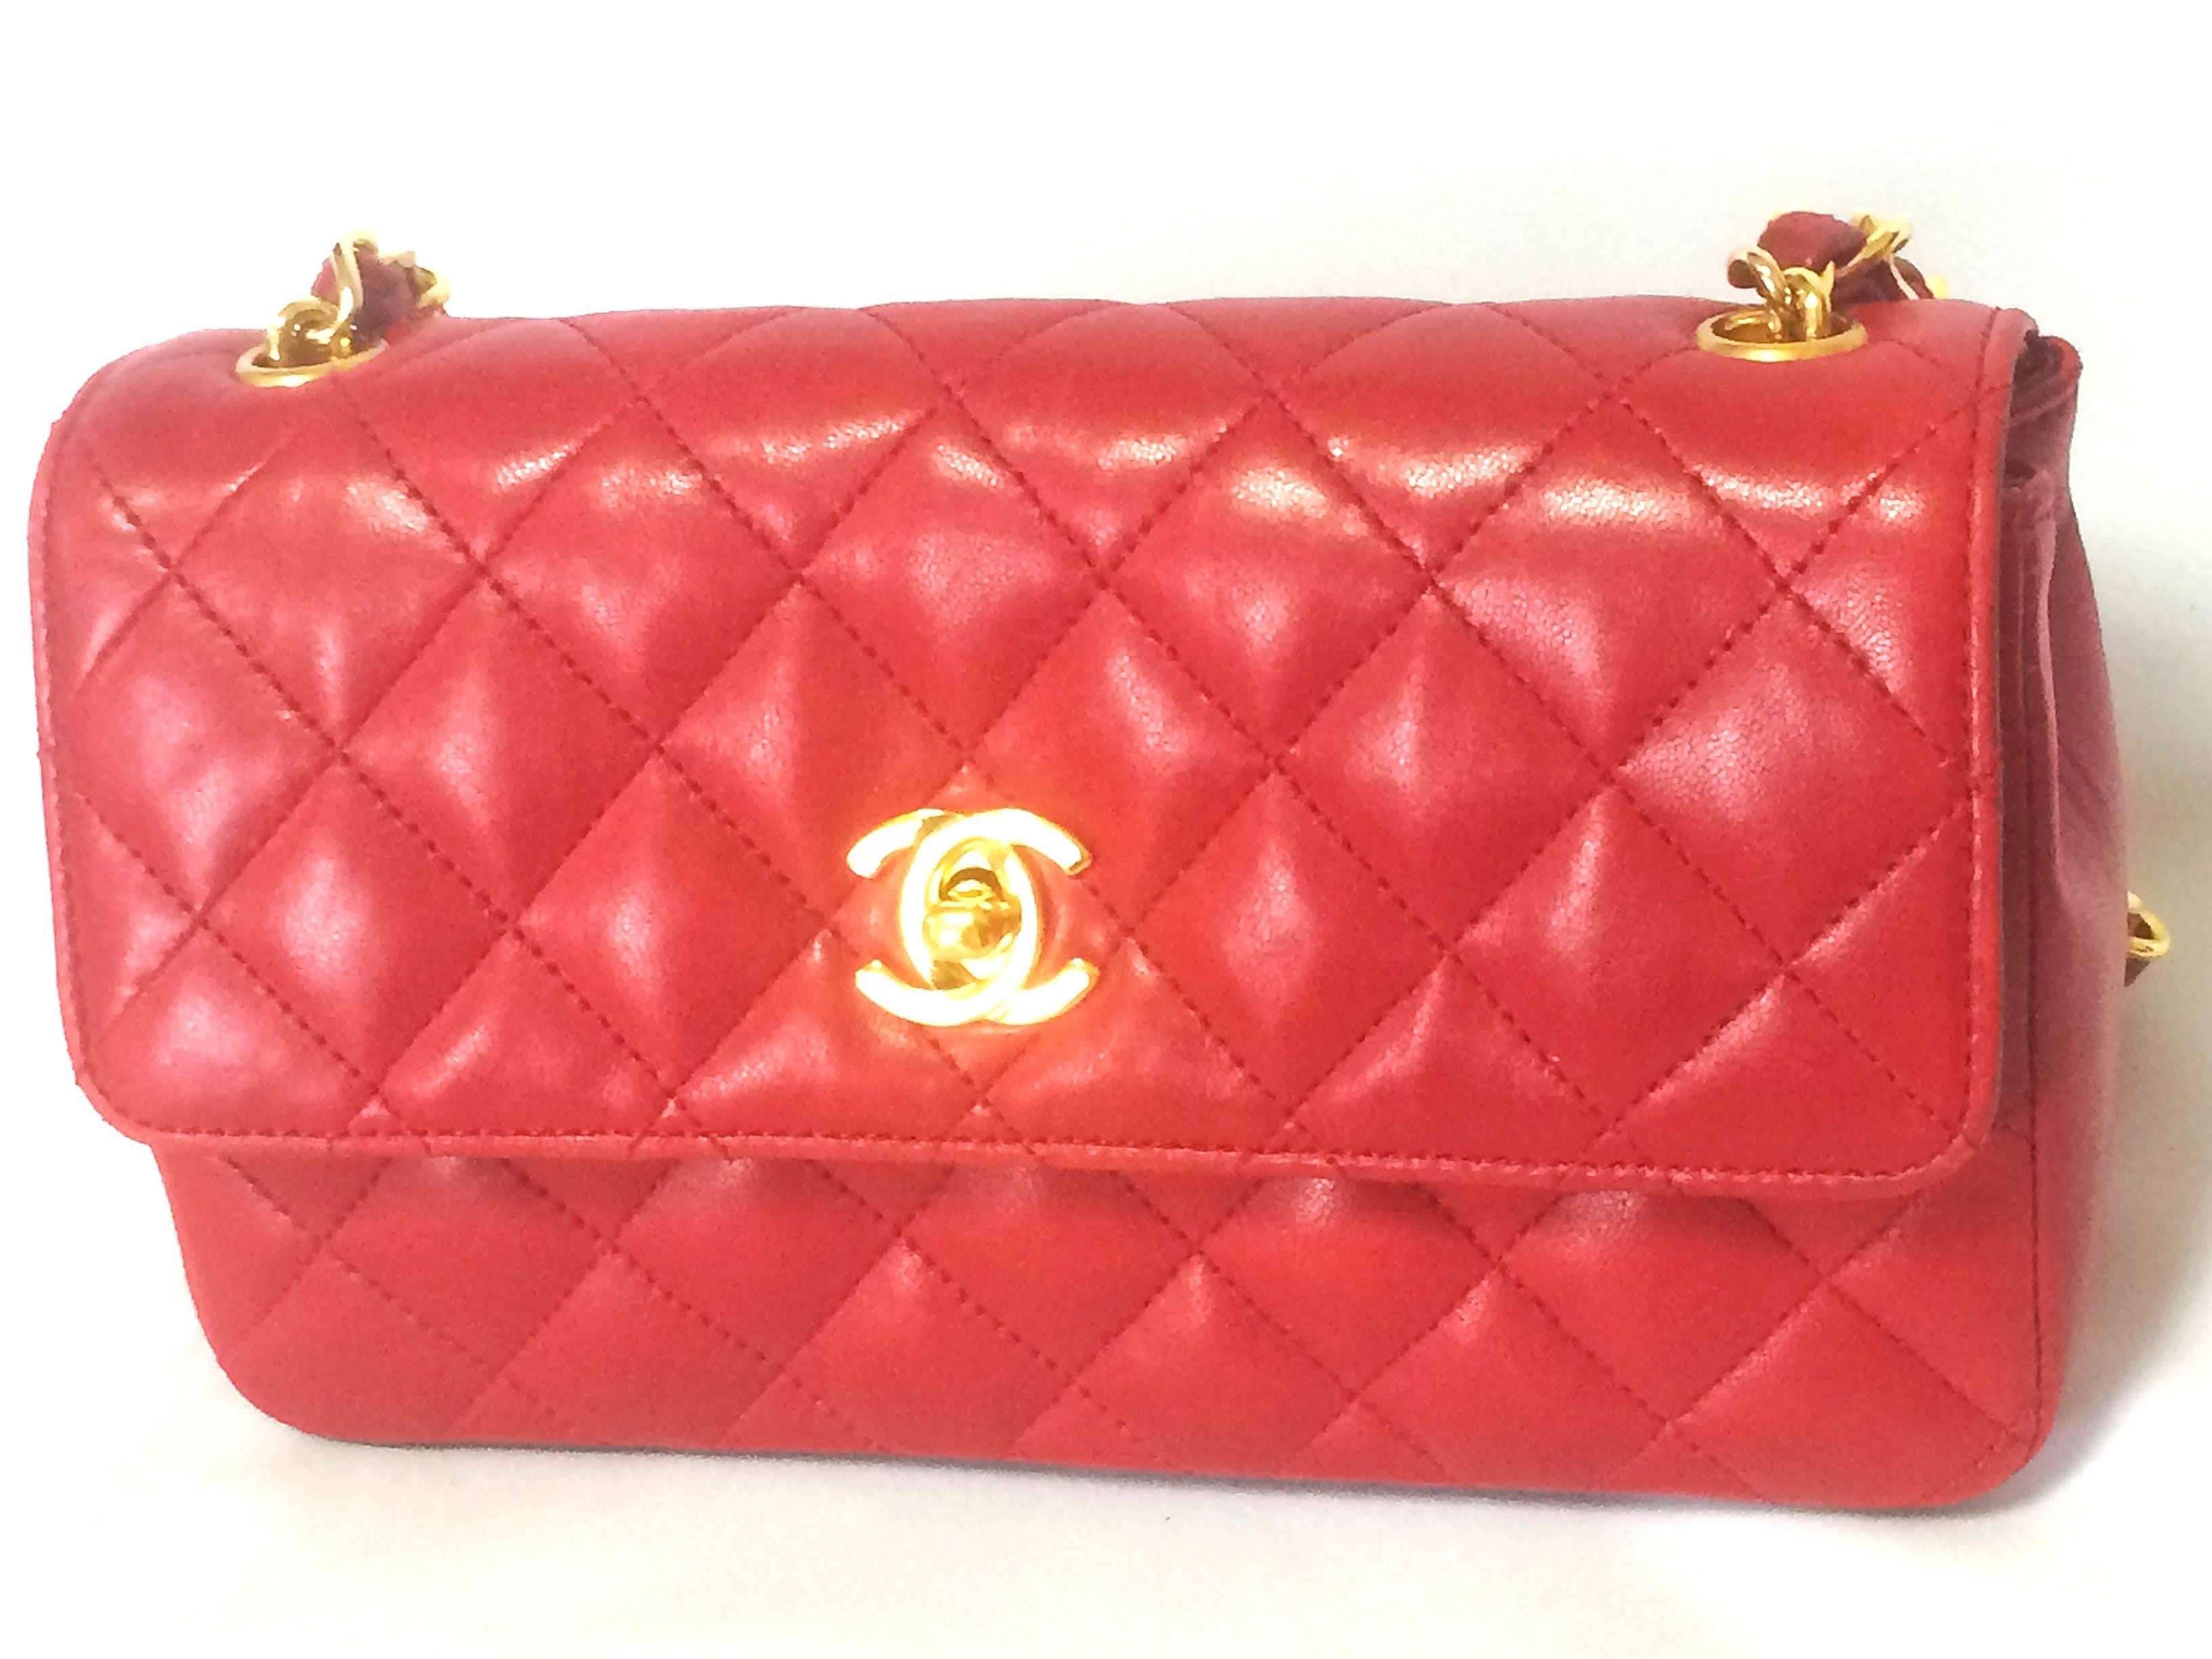 1990s. Vintage CHANEL classic mini flap 2.55 shoulder bag in lipstick red lambskin with golden CC and chain strap. Popular purse back in the era.

Here is another classic and one of the most popular purses from CHANEL....Vintage lambskin mini 2.55